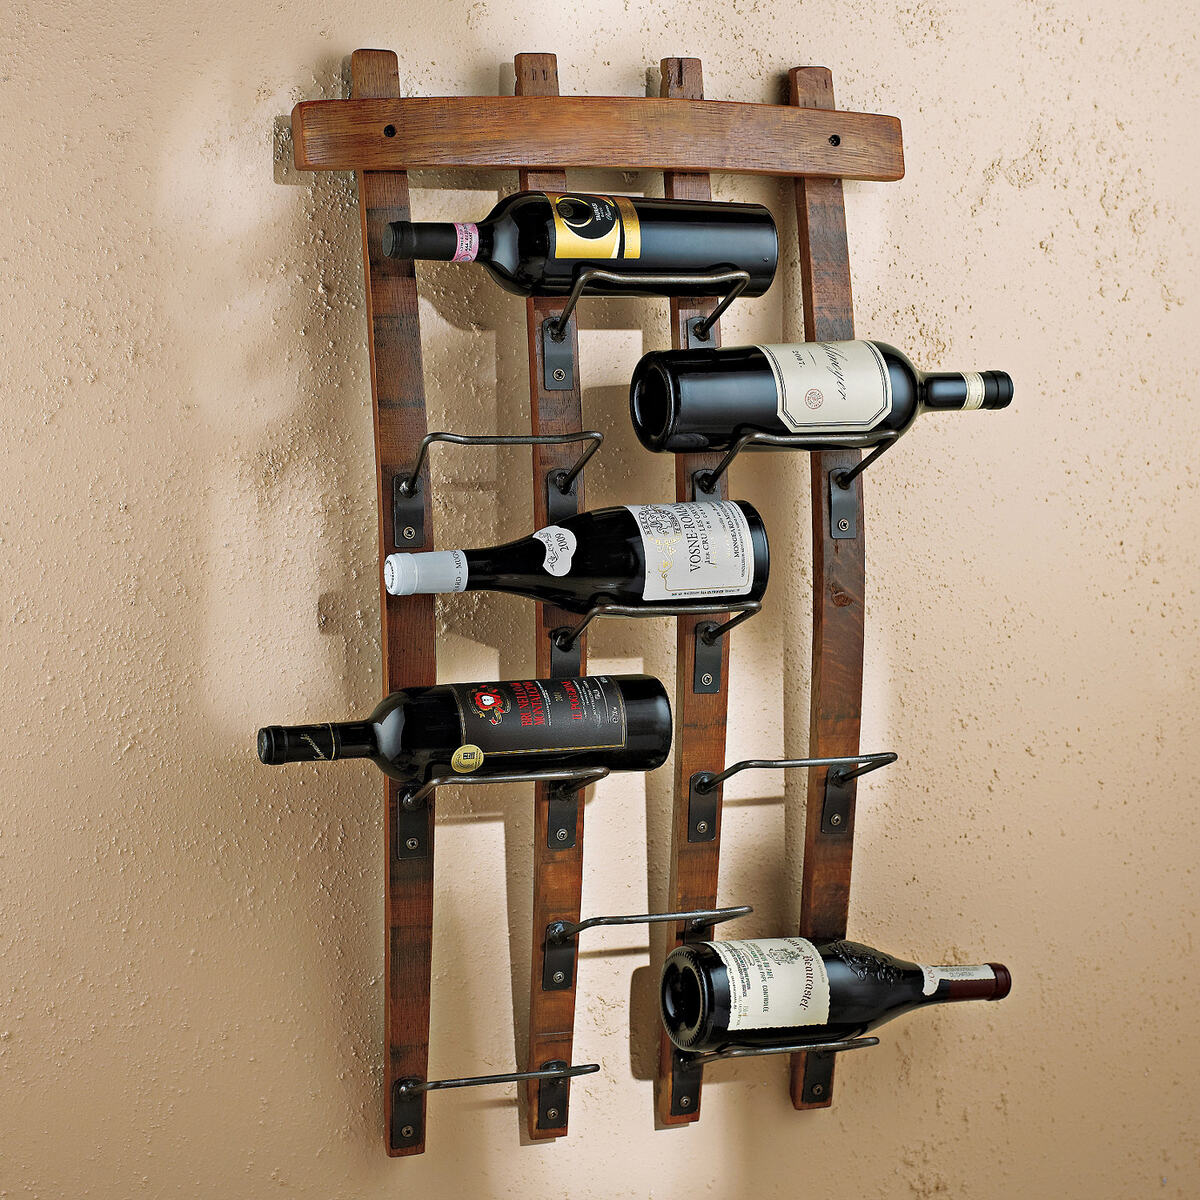 How To Build A Wall Wine Rack